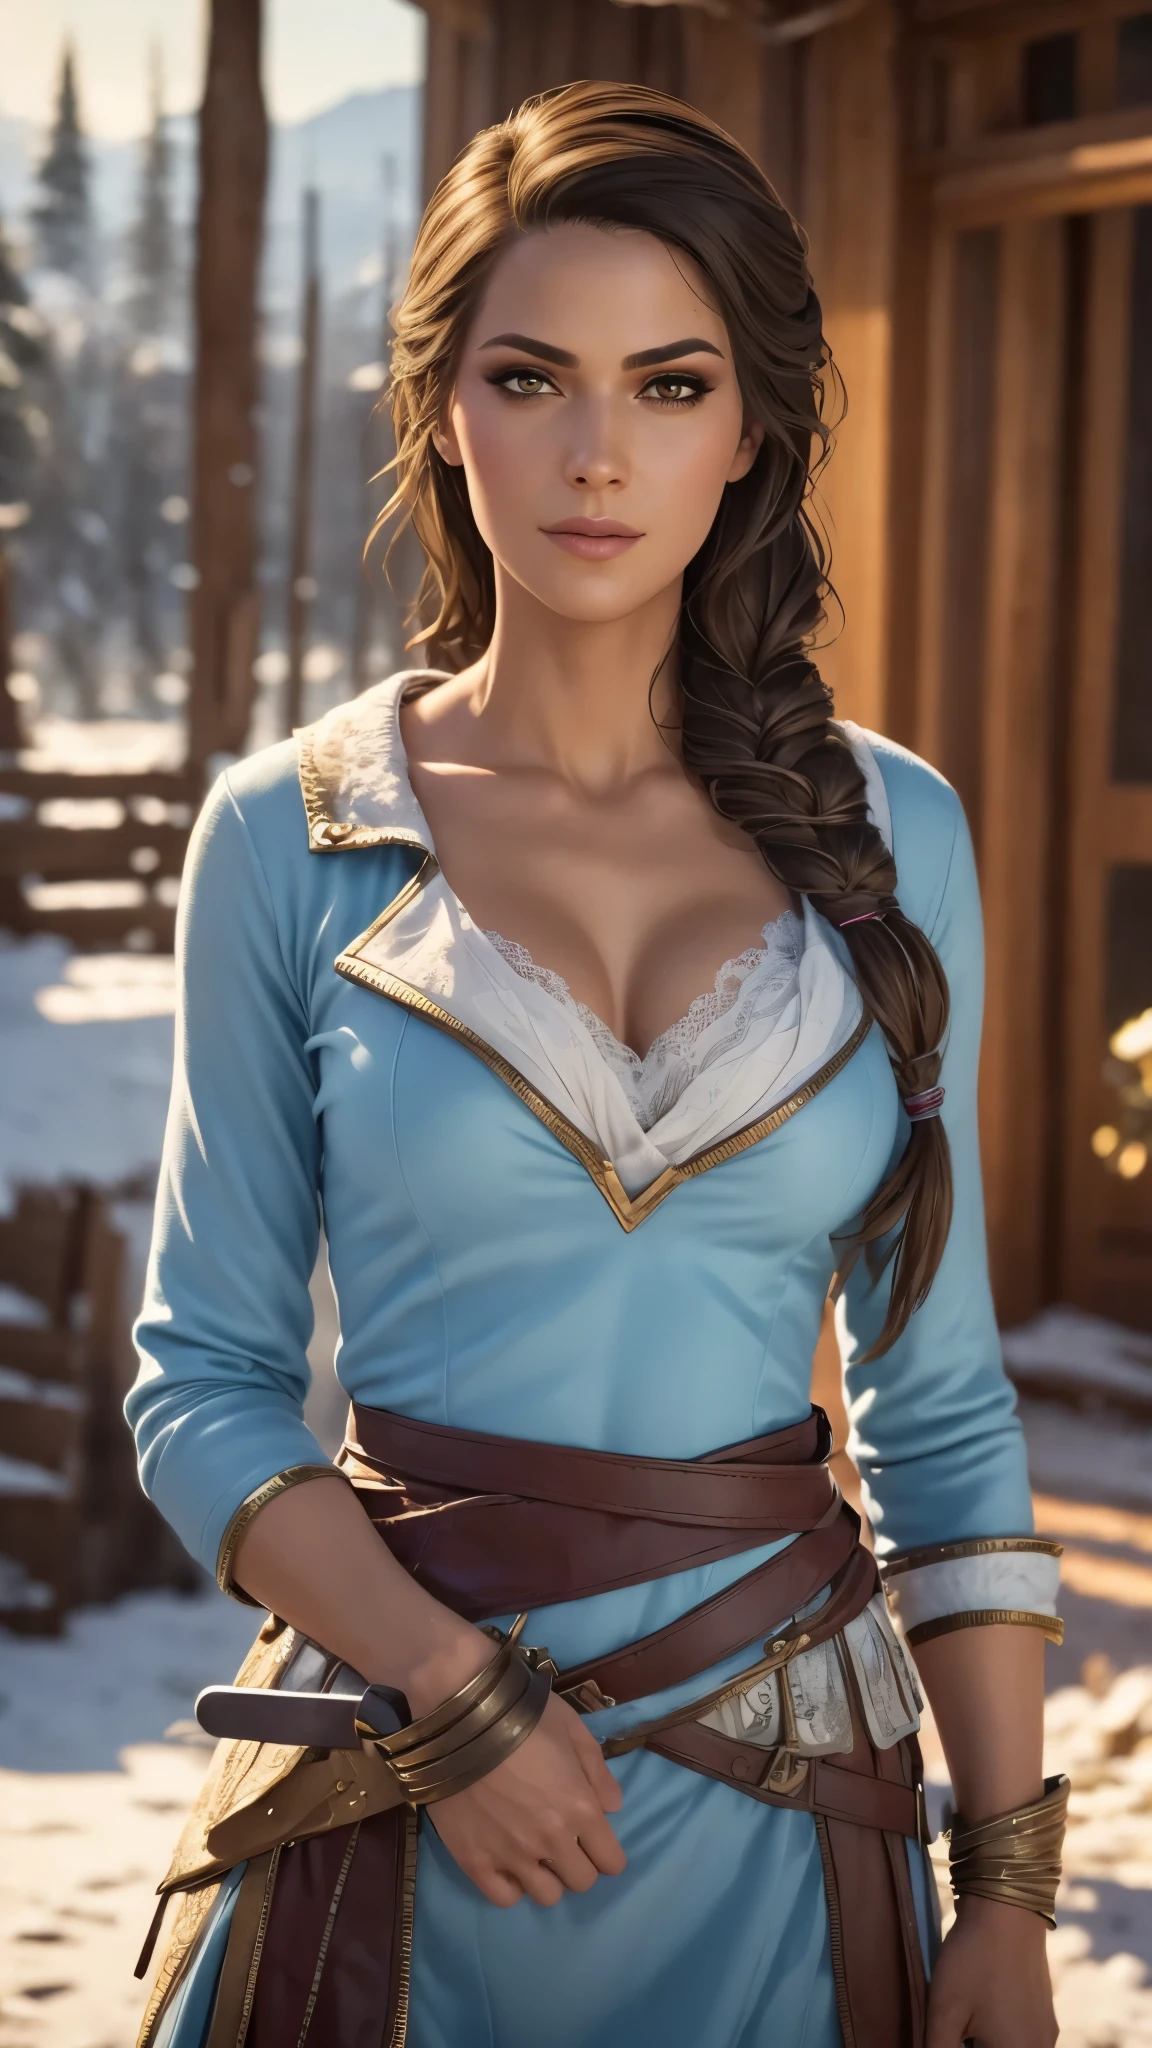 (Masterpiece, High Quality), (Very Detailed), Kassandra, Assassin's Creed Universe, Seductive Eyes, Seductive Smile, In Snow Jacket,
(Physically-based Rendering), (Realistic), (Cinematic Lighting), (High Resolution), (Detailed Textures), (Depth of Field),
(Sensual), (Alluring), (Femme Fatale), (Naughty), (Provocative), (Expressive), (Smolder), (Inviting),
(Dynamic Shadows), (Snow-covered Landscape), (Icy Blue Tones), (Realistic Fur), (Detailed Facial